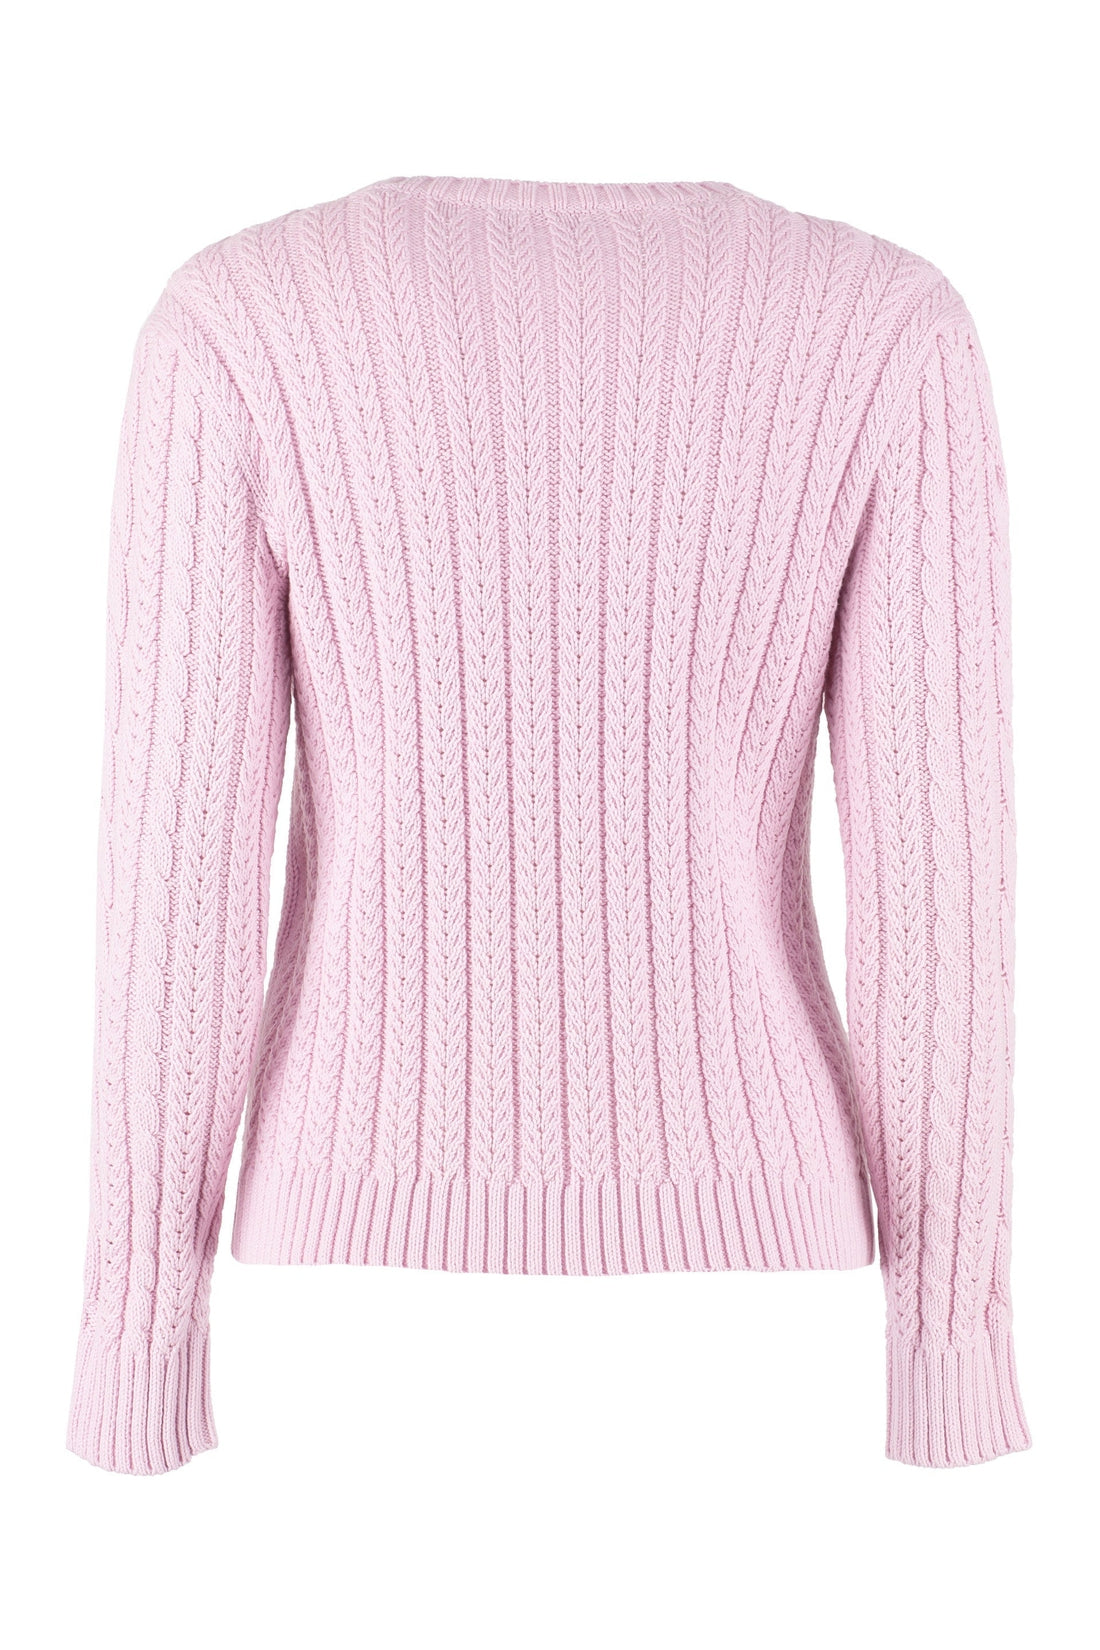 Weekend Max Mara-OUTLET-SALE-Baschi long sleeve crew-neck sweater-ARCHIVIST